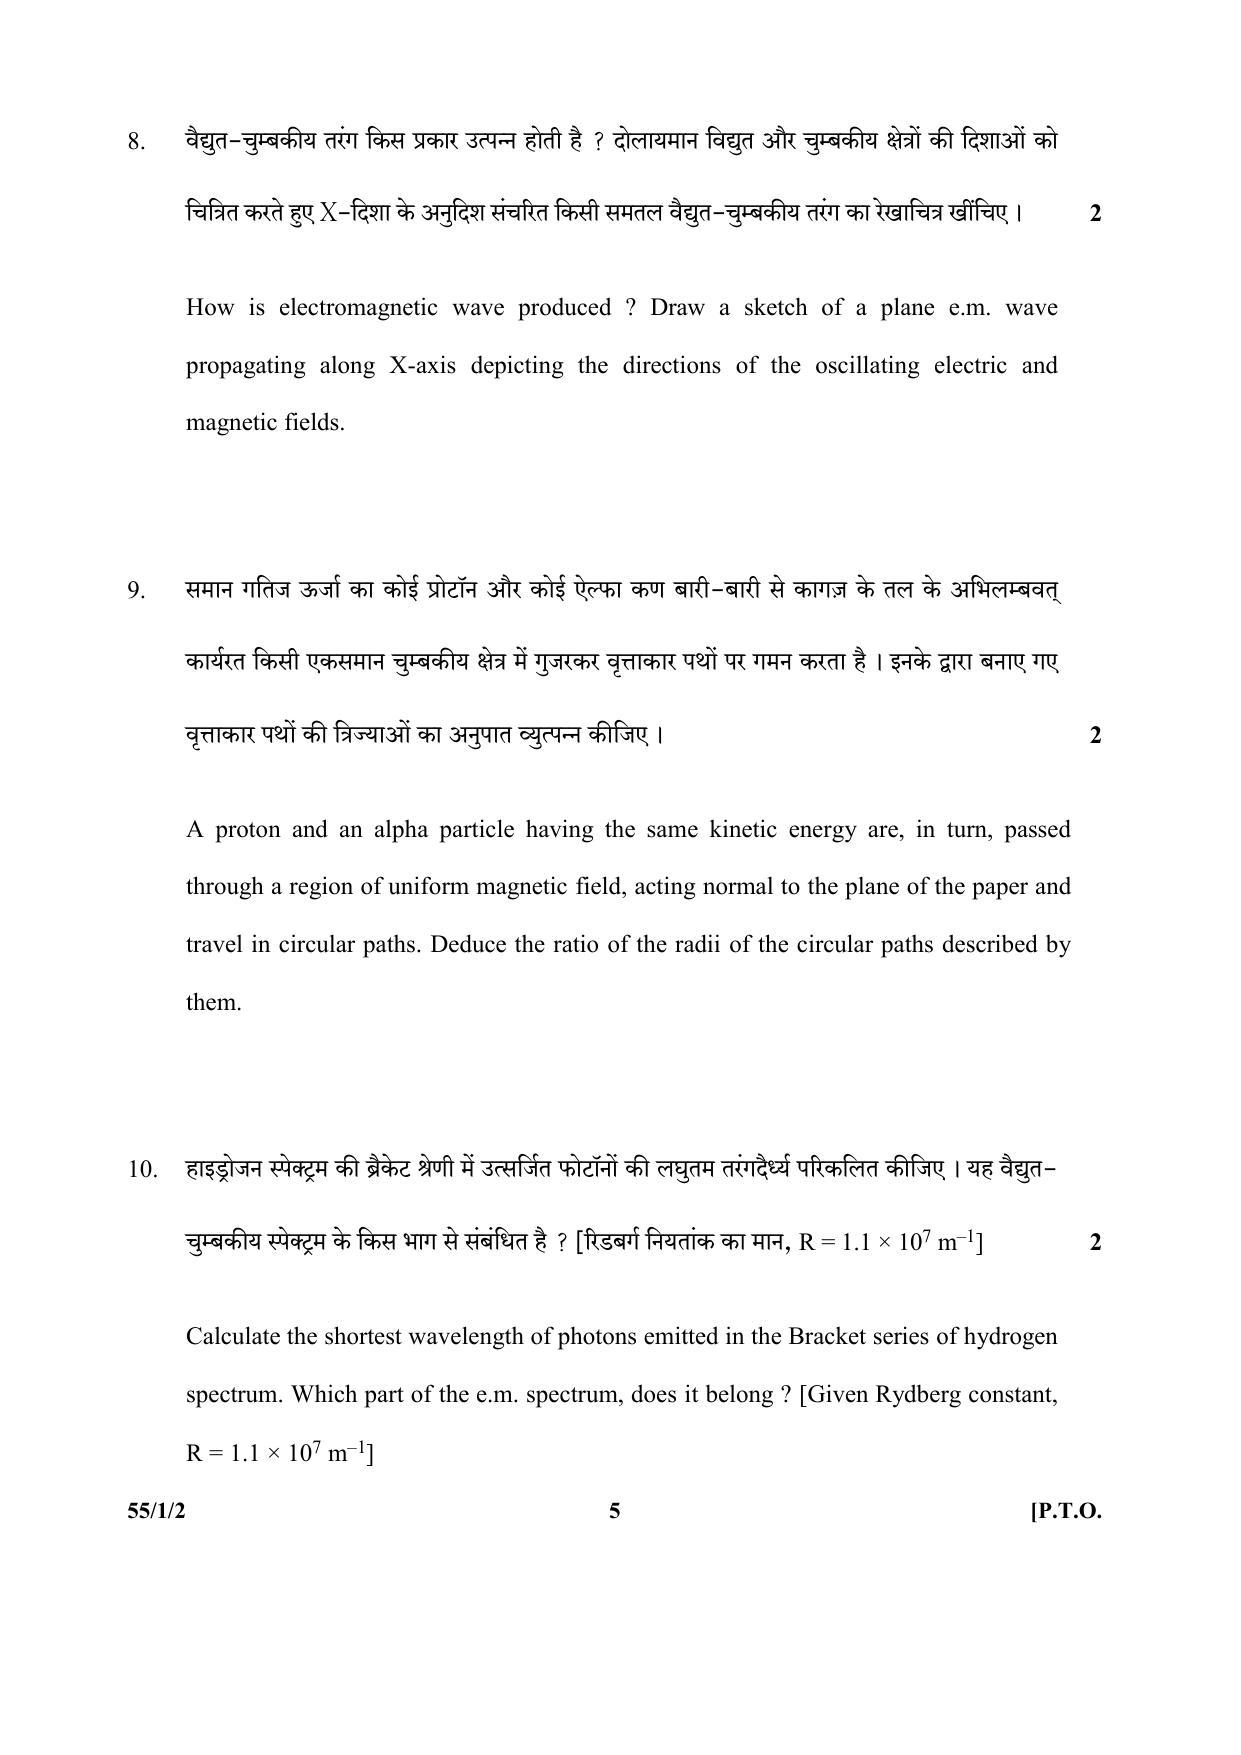 CBSE Class 12 55-1-2 (Physics) 2017-comptt Question Paper - Page 5